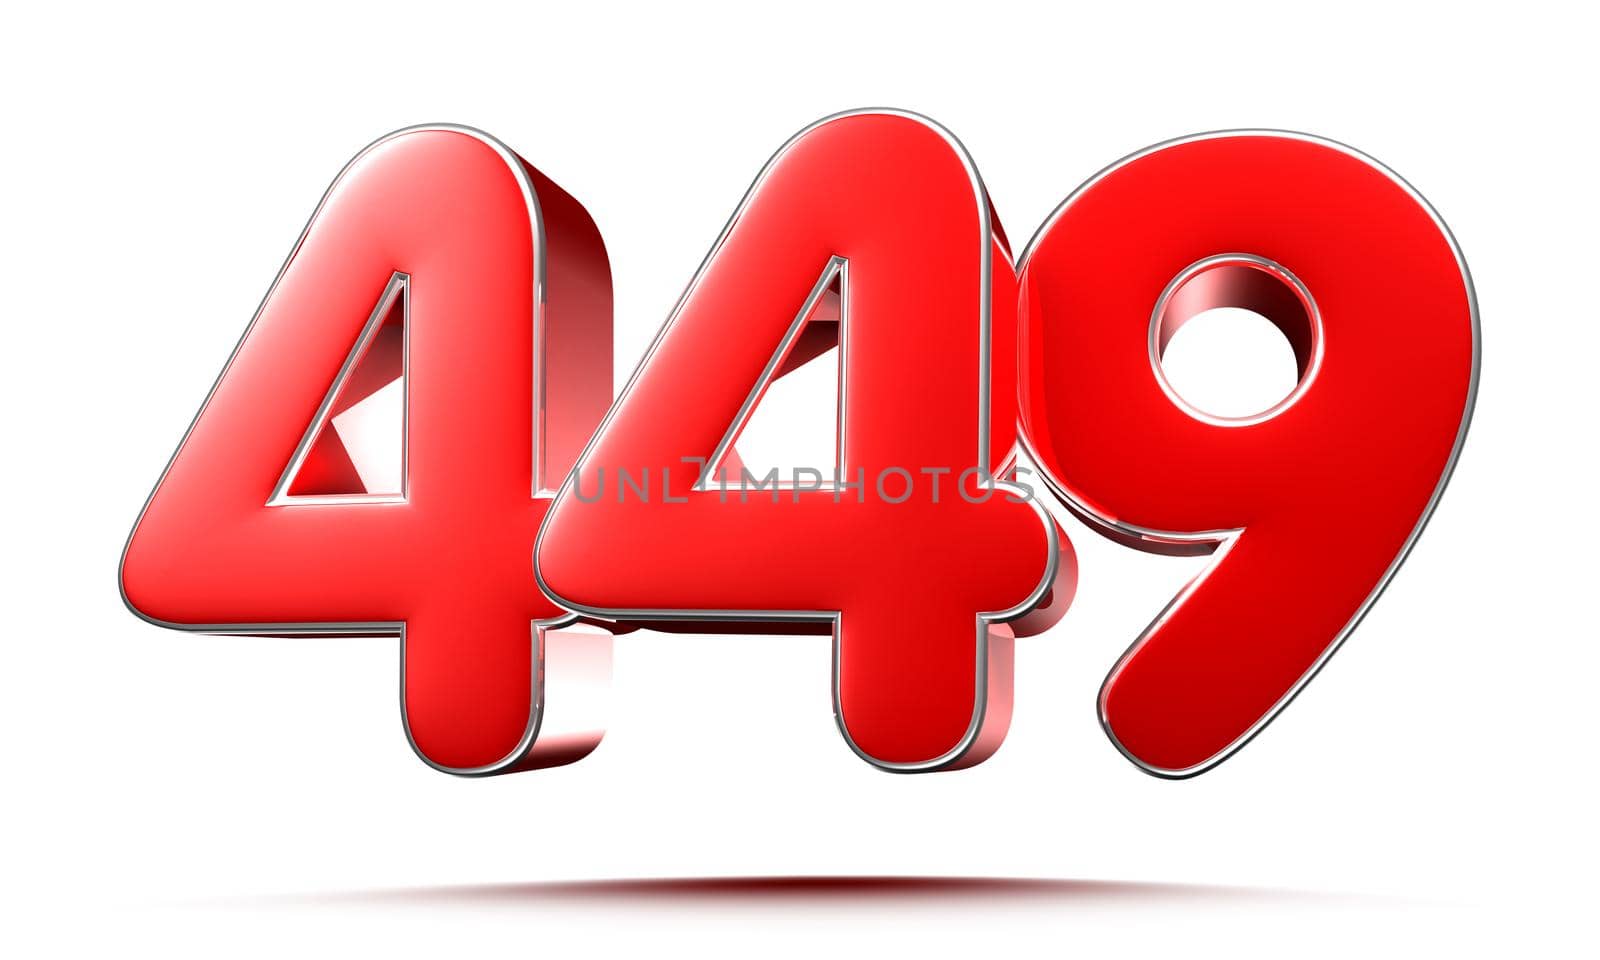 Rounded red numbers 449 on white background 3D illustration with clipping path by thitimontoyai